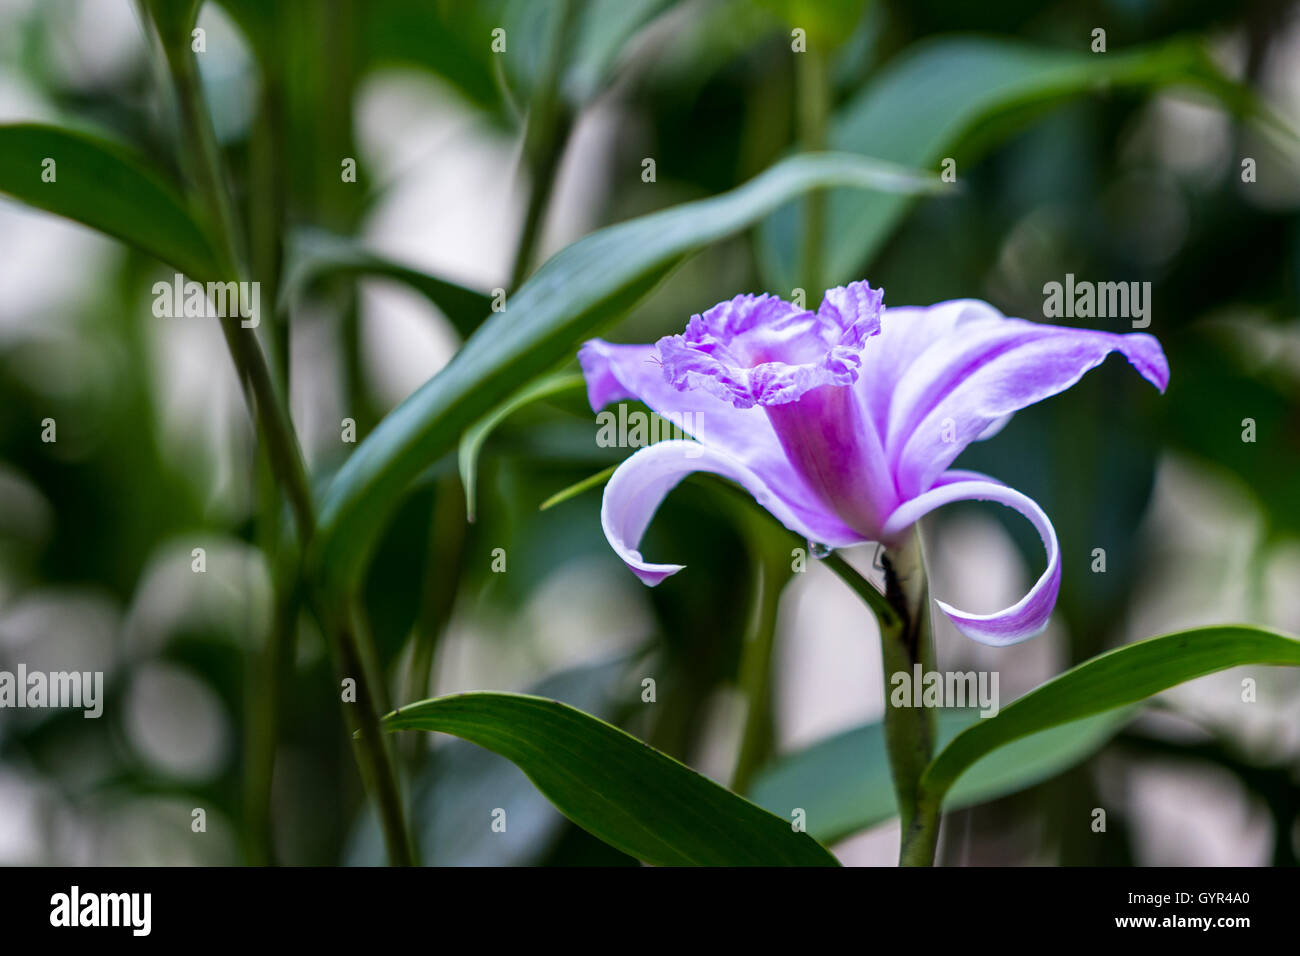 purple orchid with green foliage in the background, photo taken in San Carlos Costa Rica Stock Photo